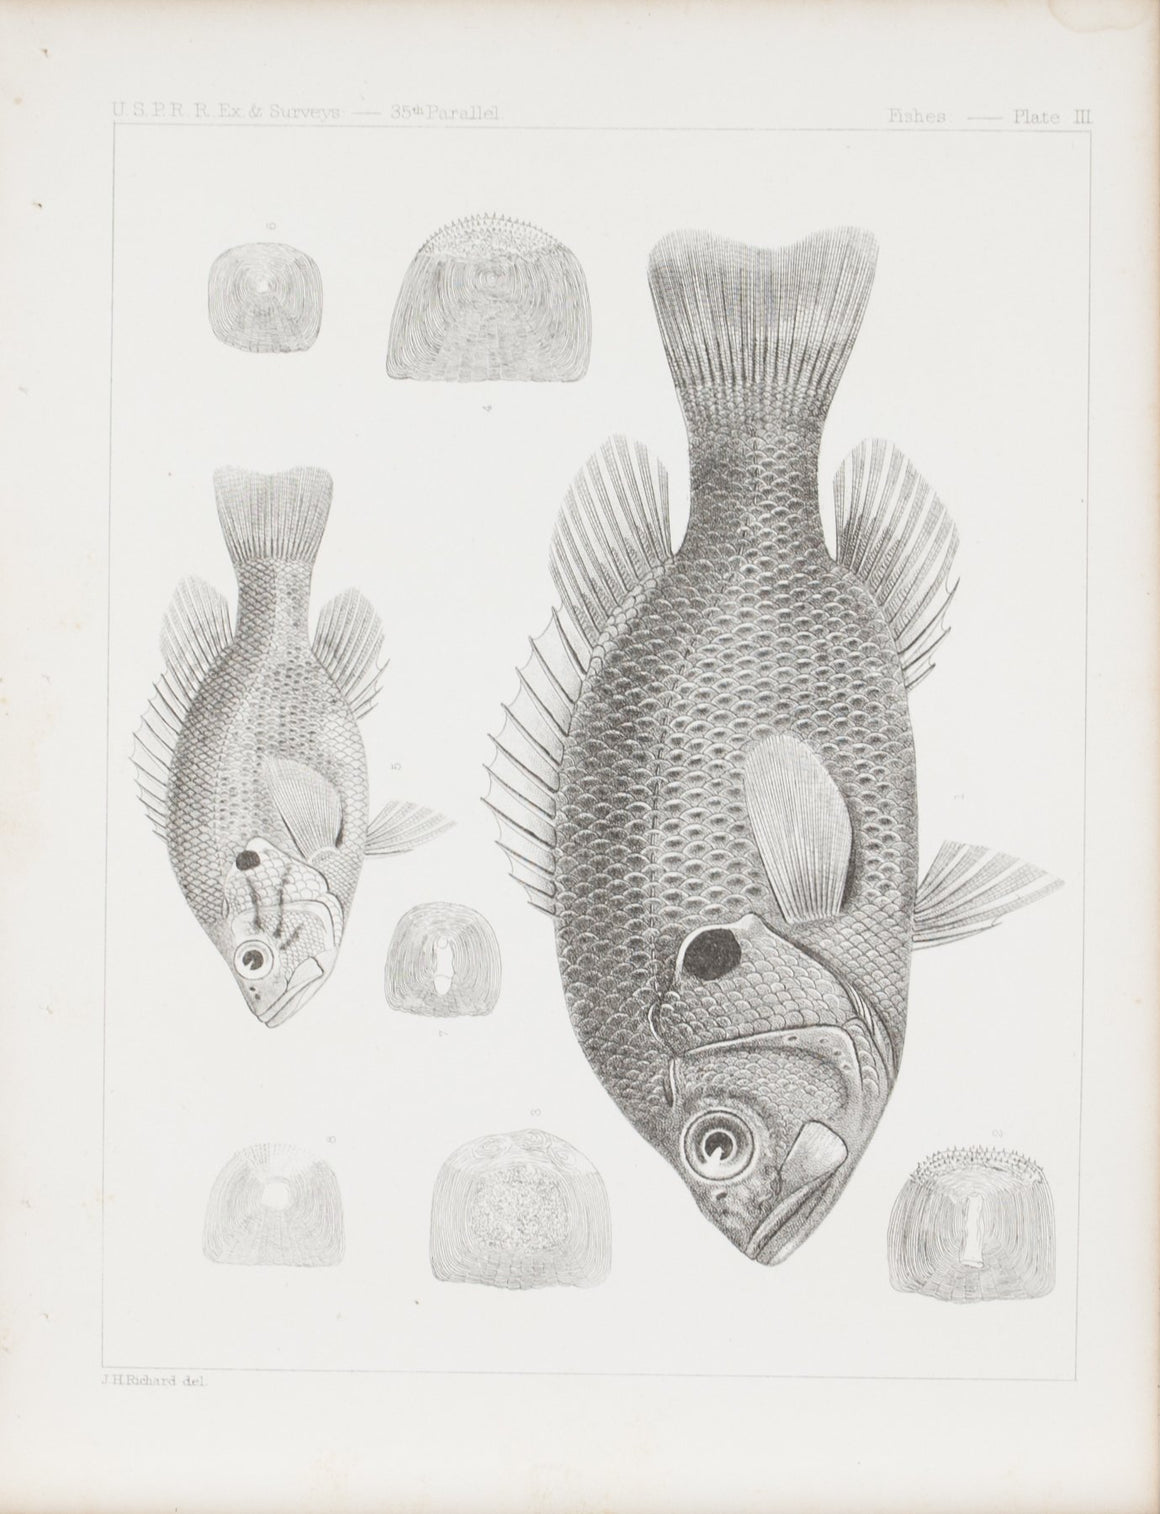 Fishes Plate III 1859 U.S.P.R.R. Lithograph Fish Print